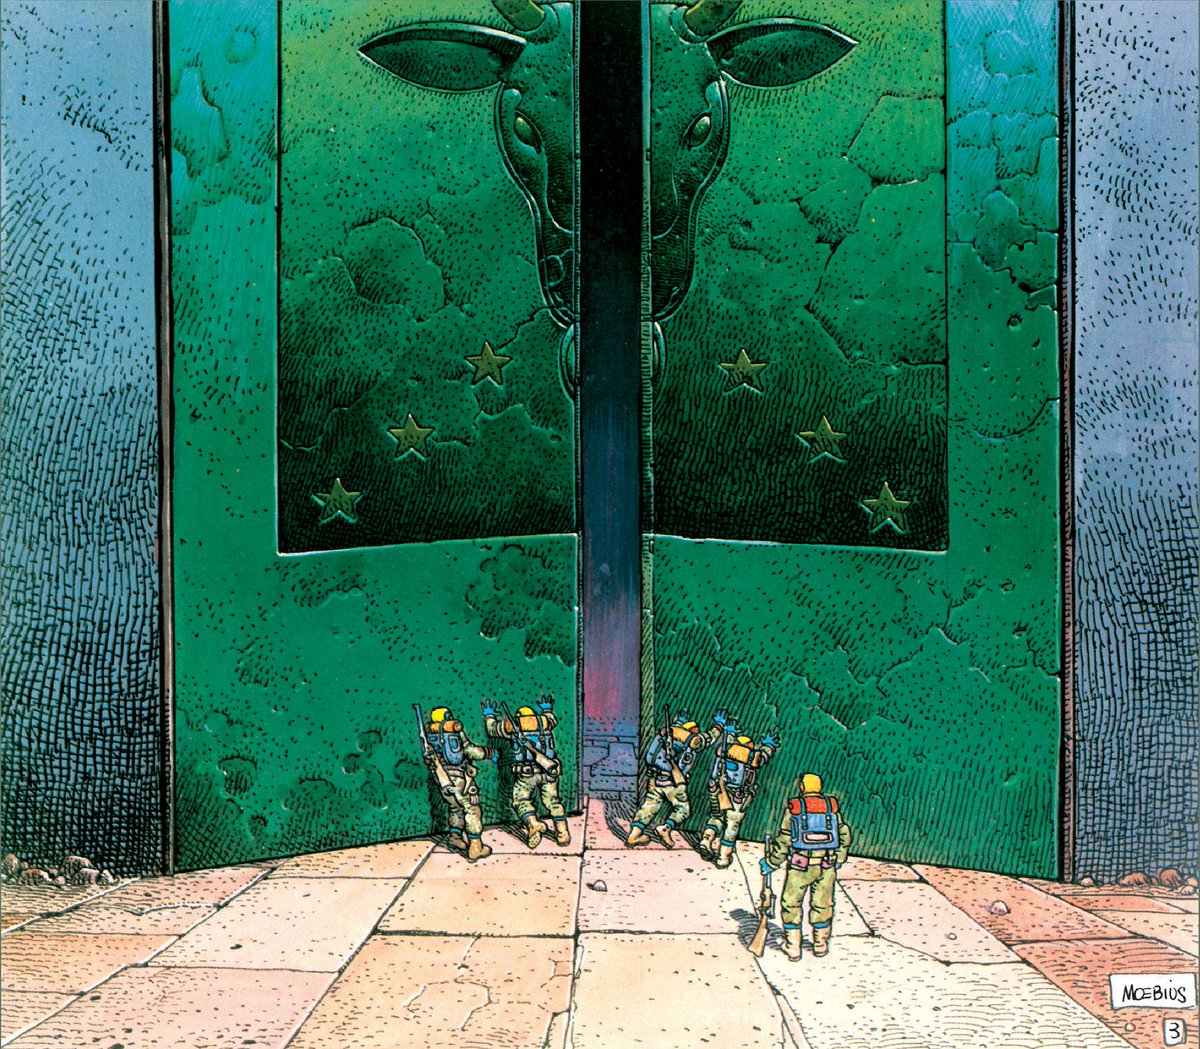 “The man who comes back through the Door in the Wall will never be quite the same as the man who went out.' —Aldous Huxley, The Doors of Perception Illustration from 'KTULU' by Mœbius, Métal Hurlant N° 33 bis, Special Lovecraft Issue, 1978. #MoebiusMonday